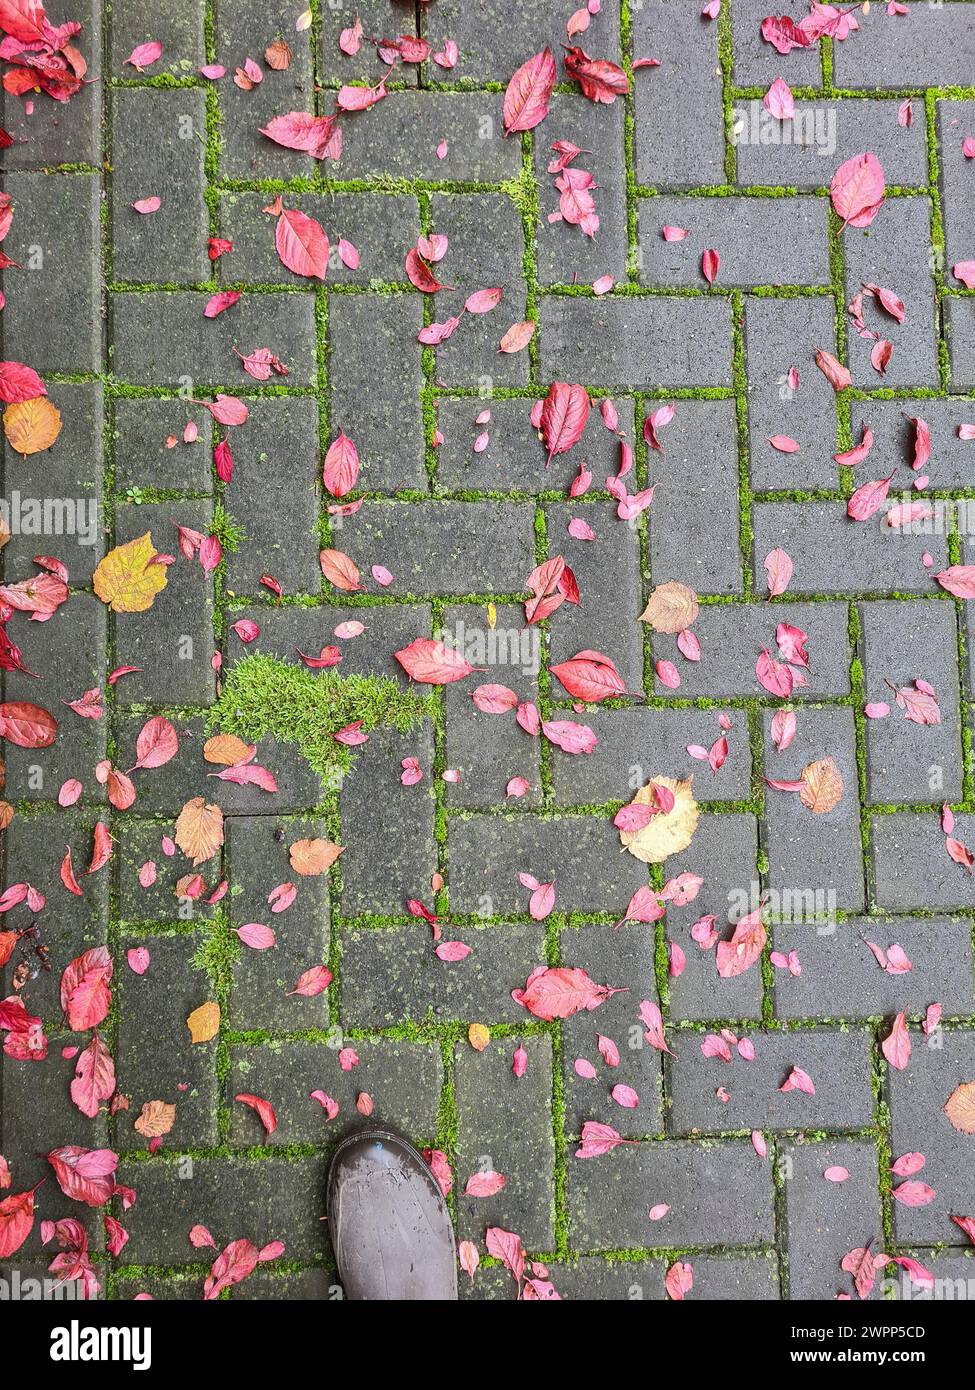 Various colorful autumn leaves from the cherry tree and the Japanese plum tree as well as hazelnut leaves have fallen on the paving stones with moss after a rain shower, rubber boots in the foreground at the edge of the picture Stock Photo